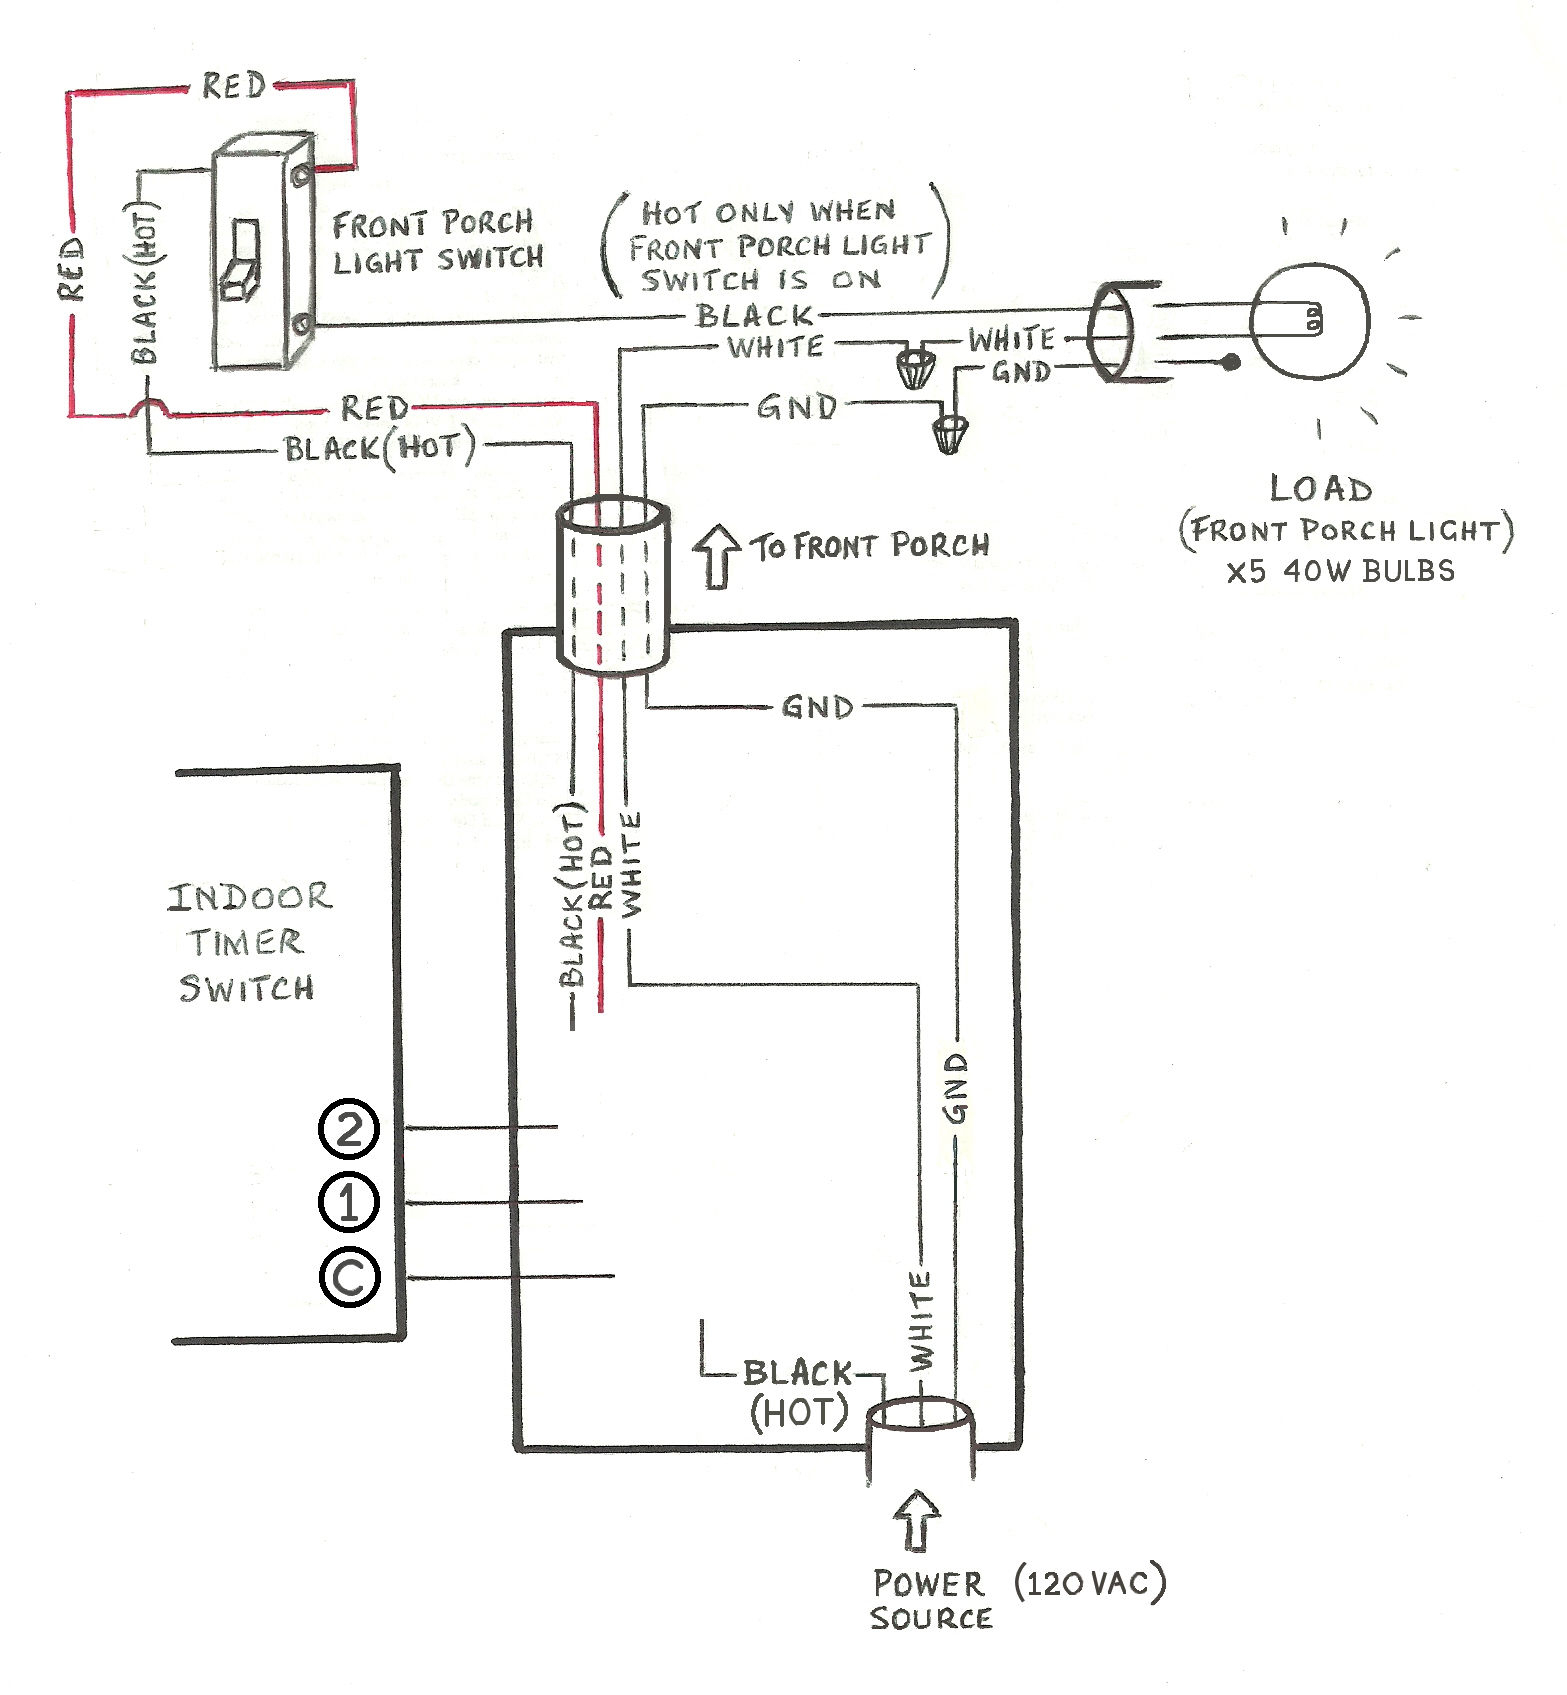 Need Help Wiring A 3-Way Honeywell Digital Timer Switch - Home - Wiring Diagram Light Switch